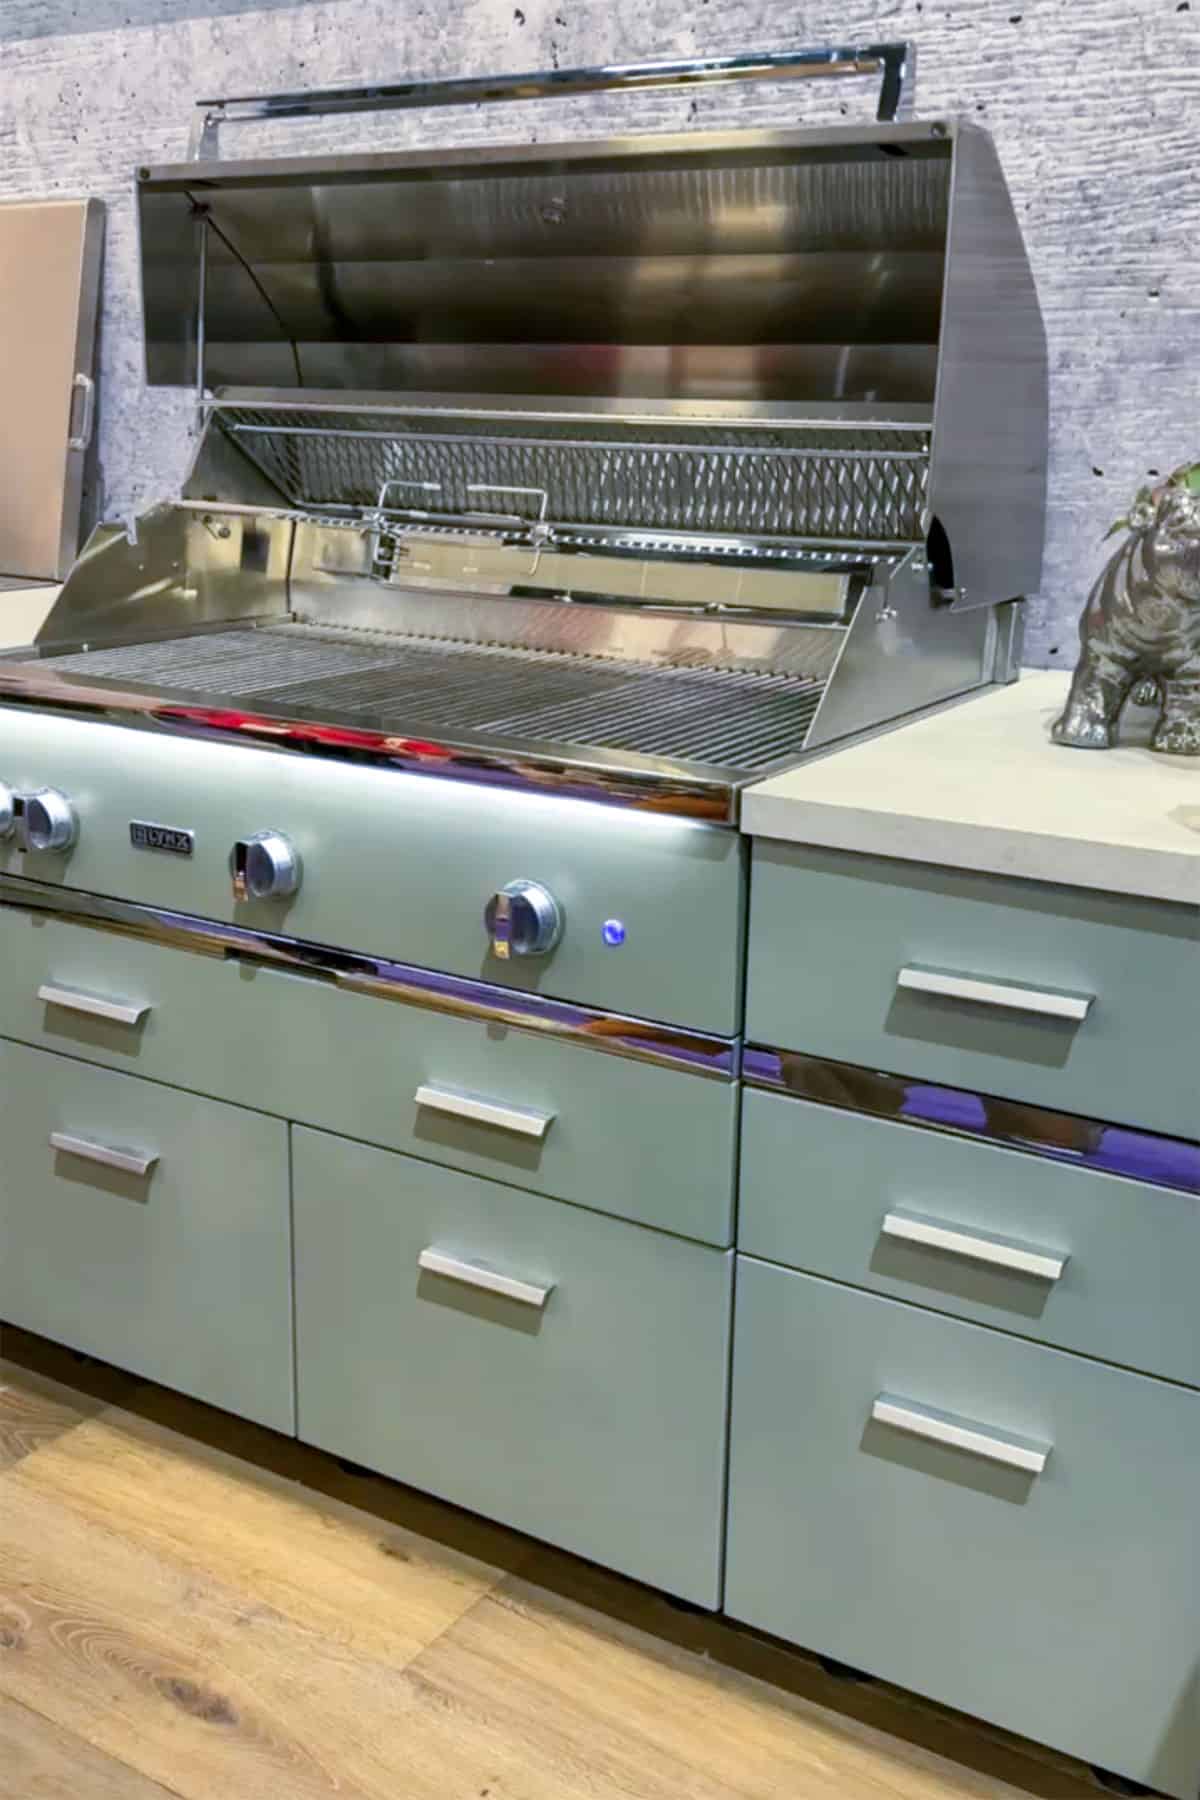 Lynx gas grill with cabinets. 